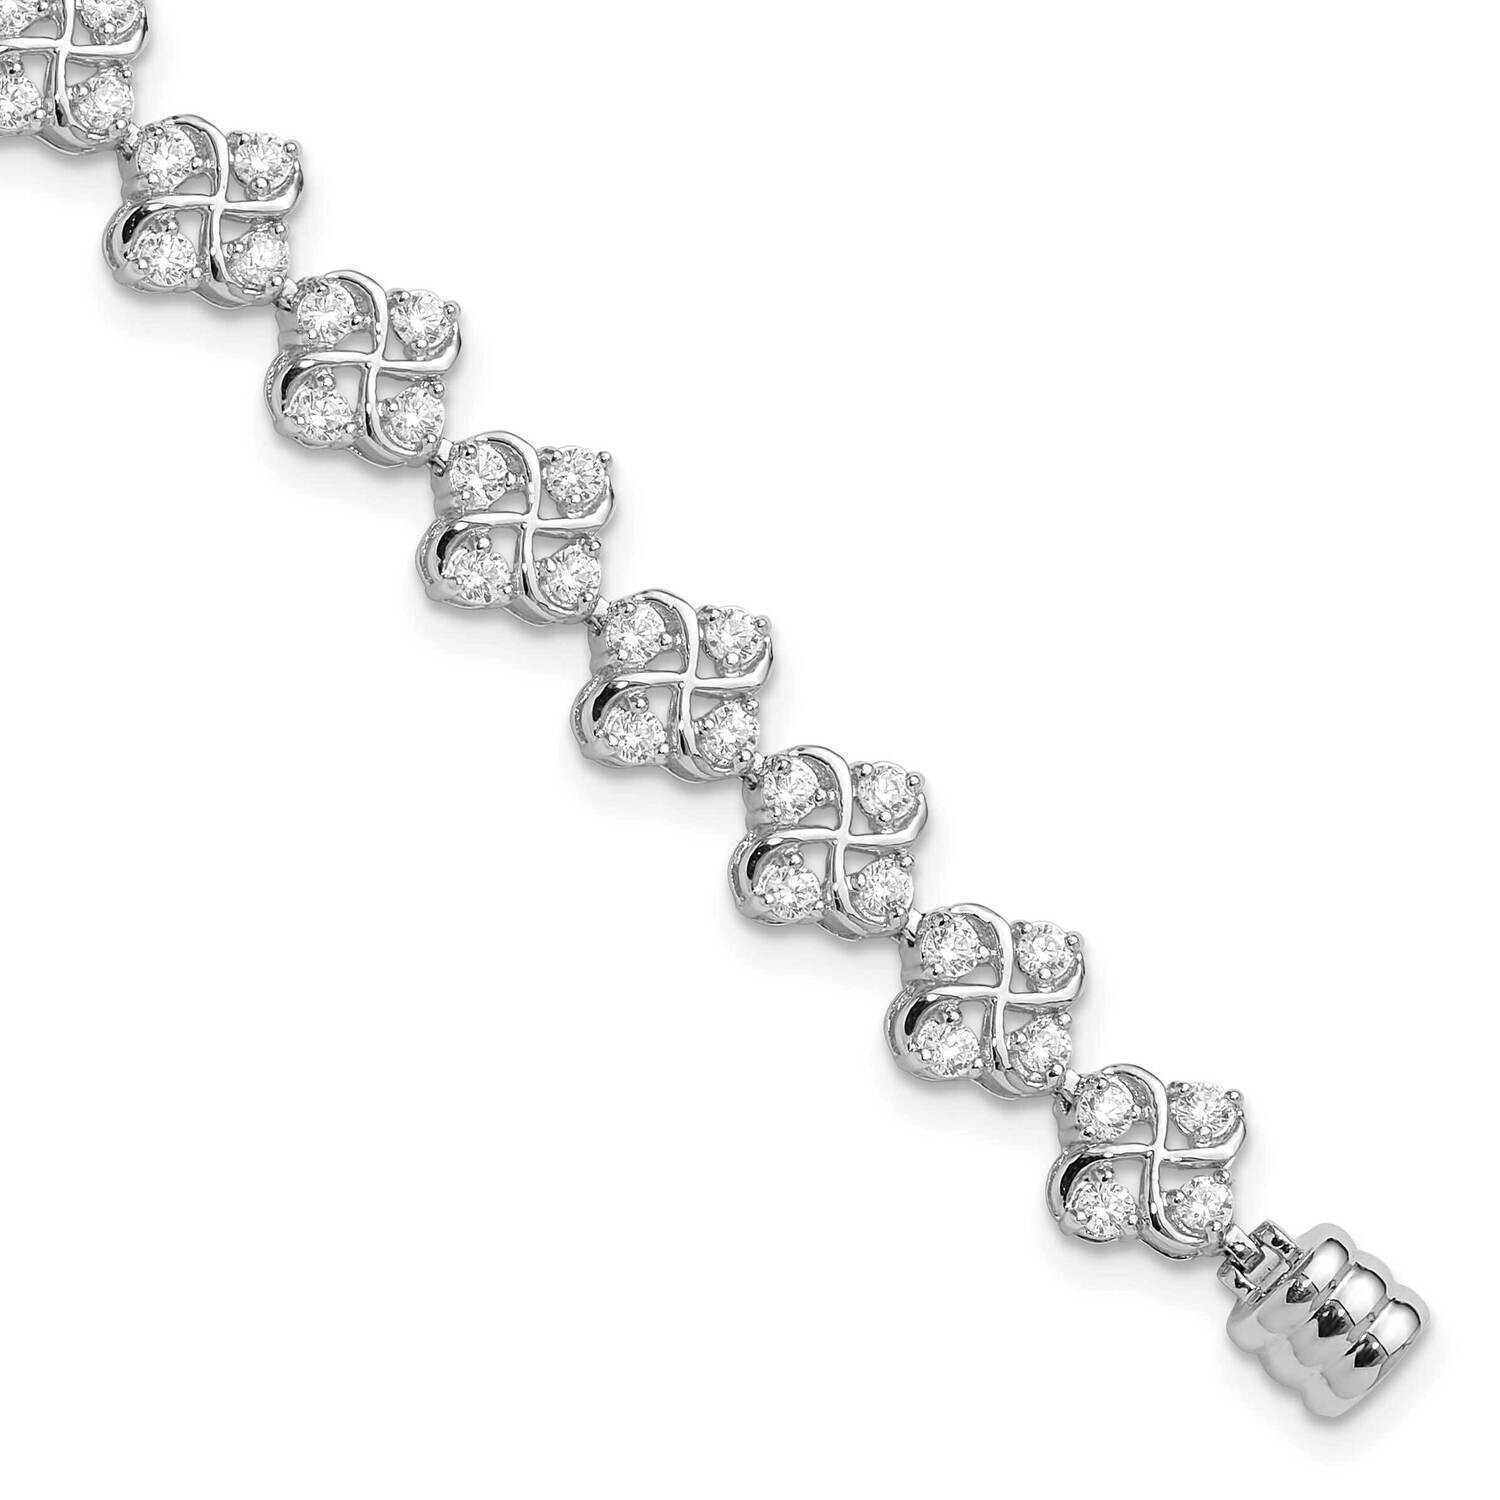 Polished CZ Cluster Magnetic Clasp Bracelet 8 Inch Sterling Silver Rhodium-Plated QG6458-7.25